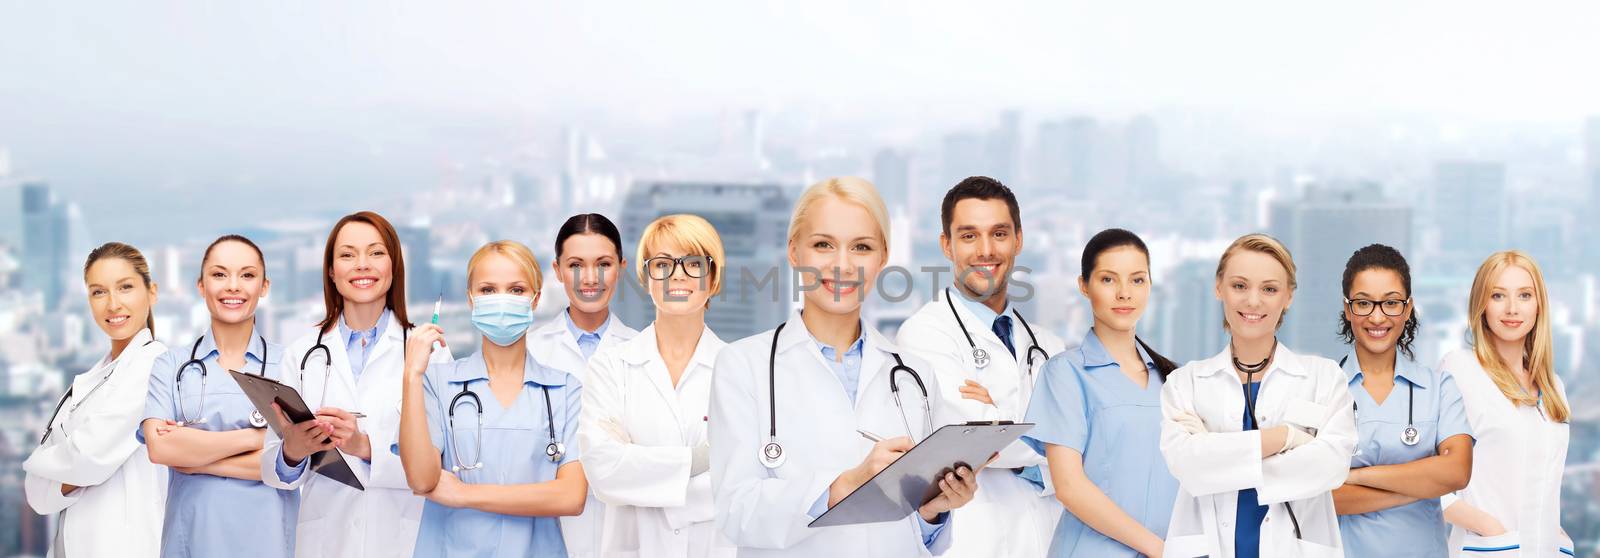 smiling female doctors and nurses with stethoscope by dolgachov